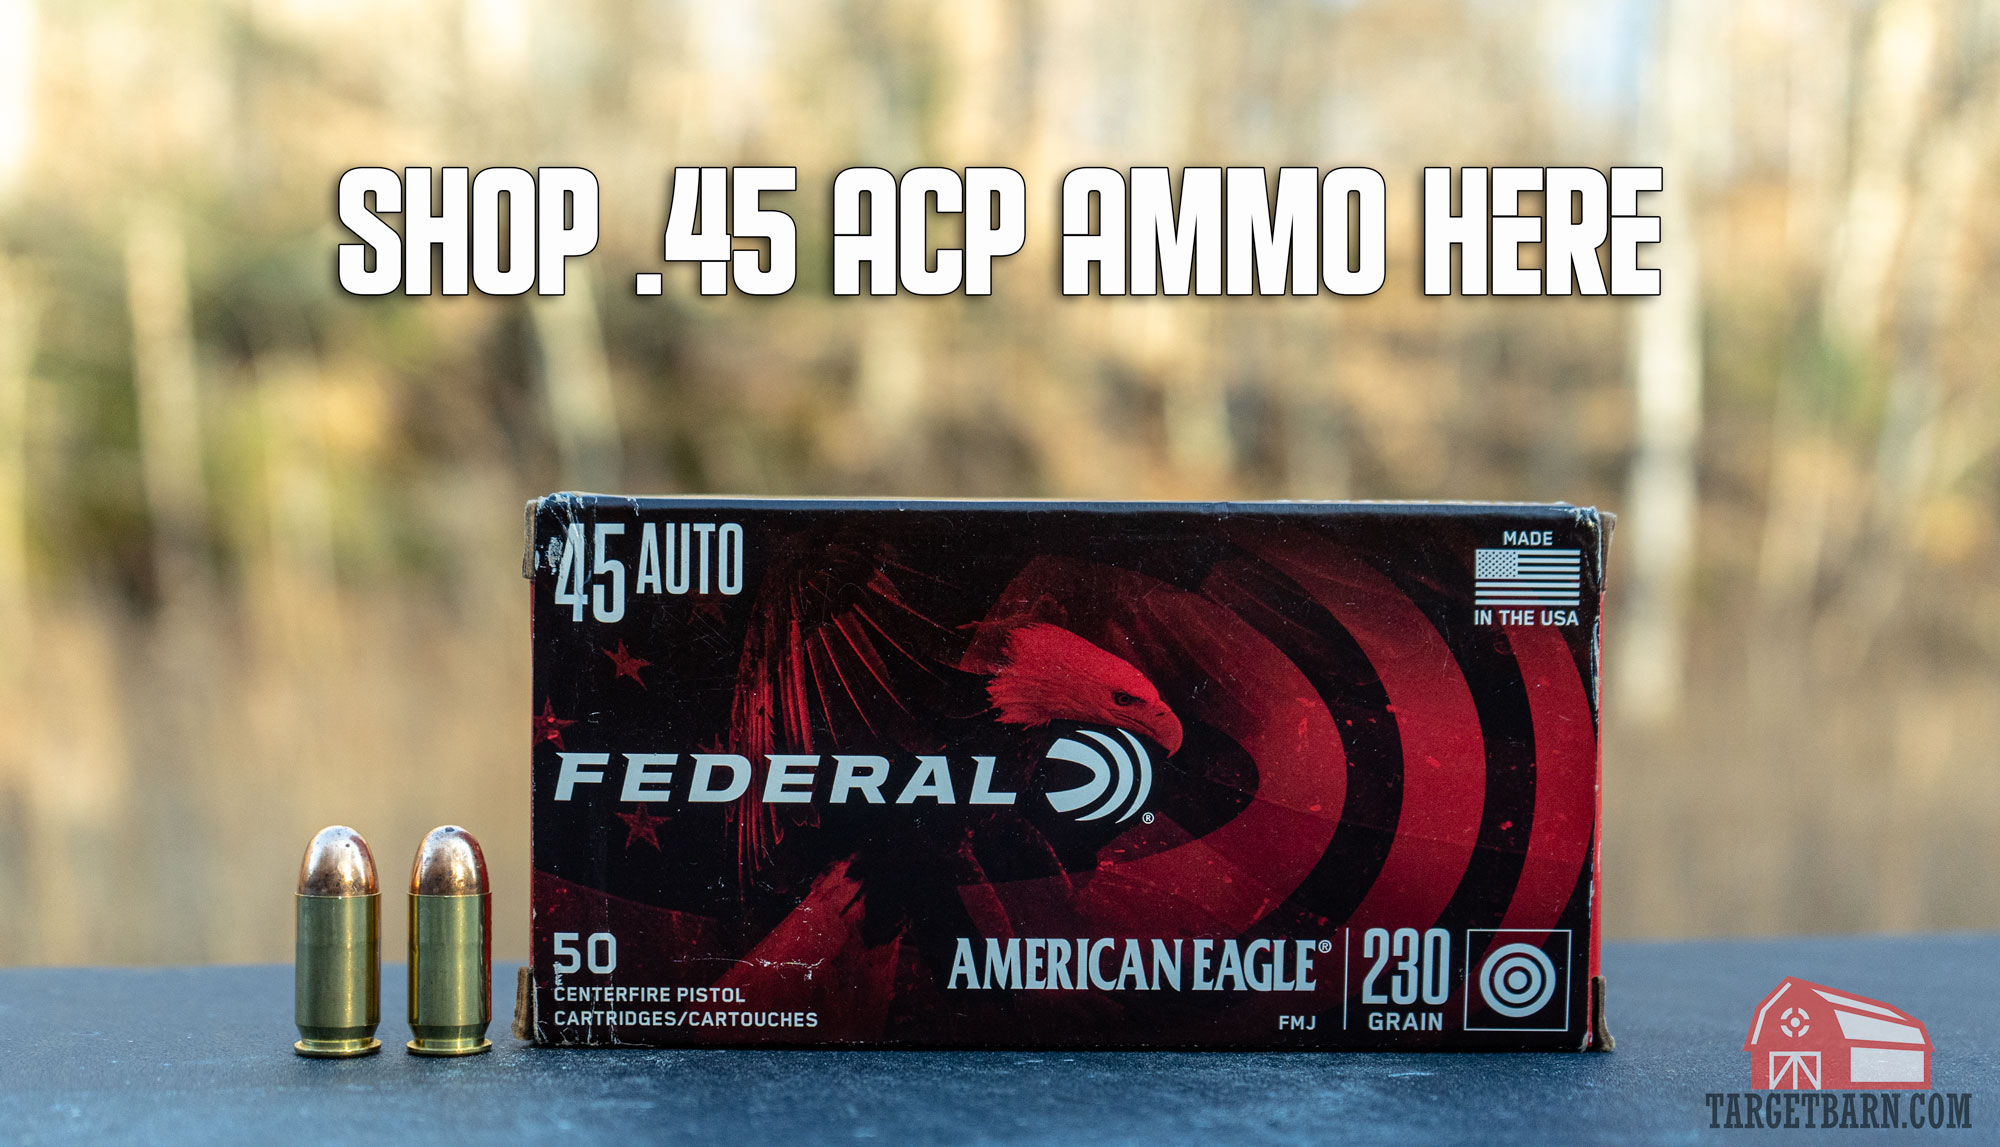 a box of 45 acp ammo with text saying shop 45 acp ammo here